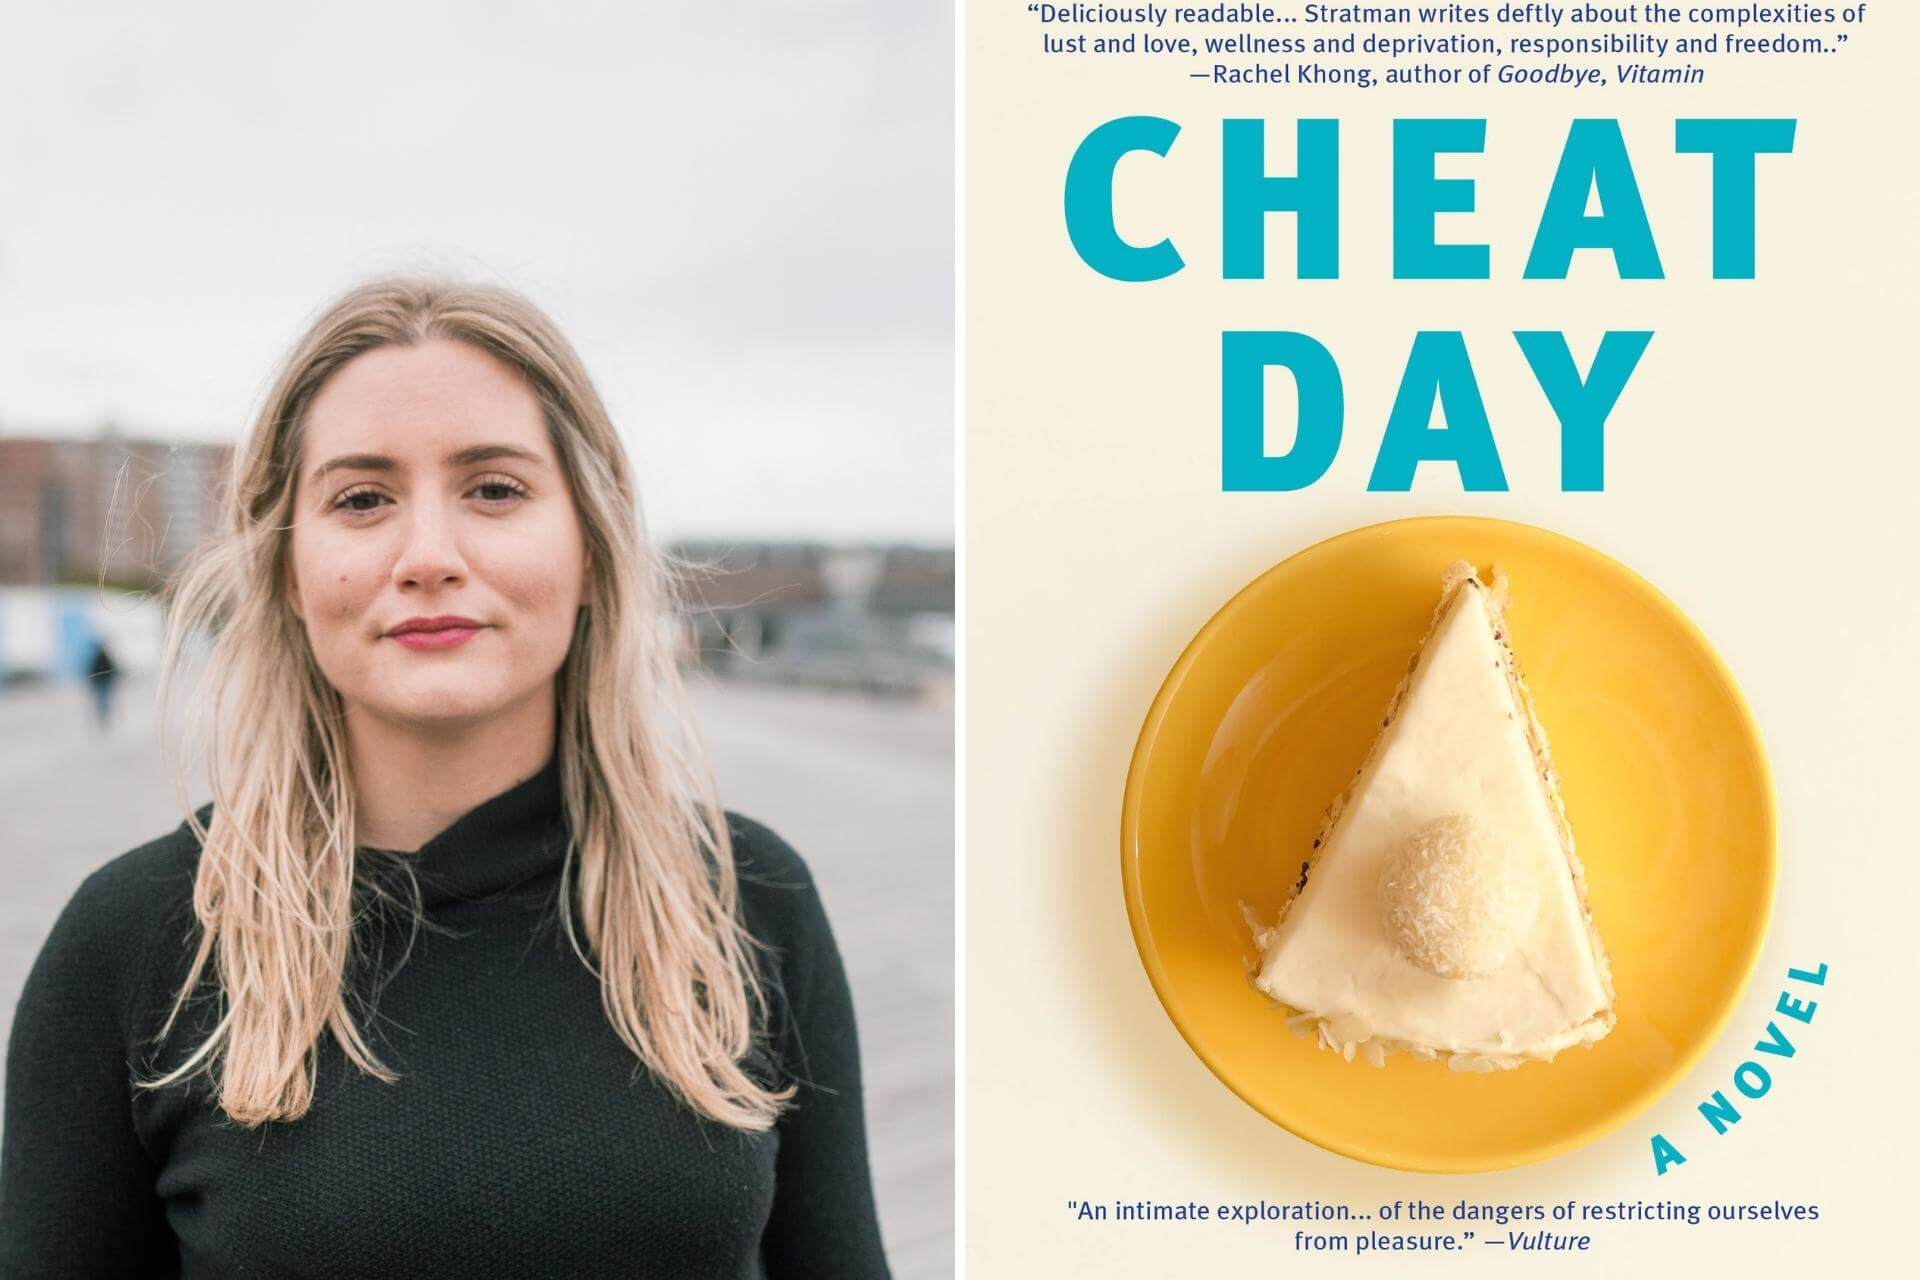 Q&A with Liv Stratman, Author of Cheat Day